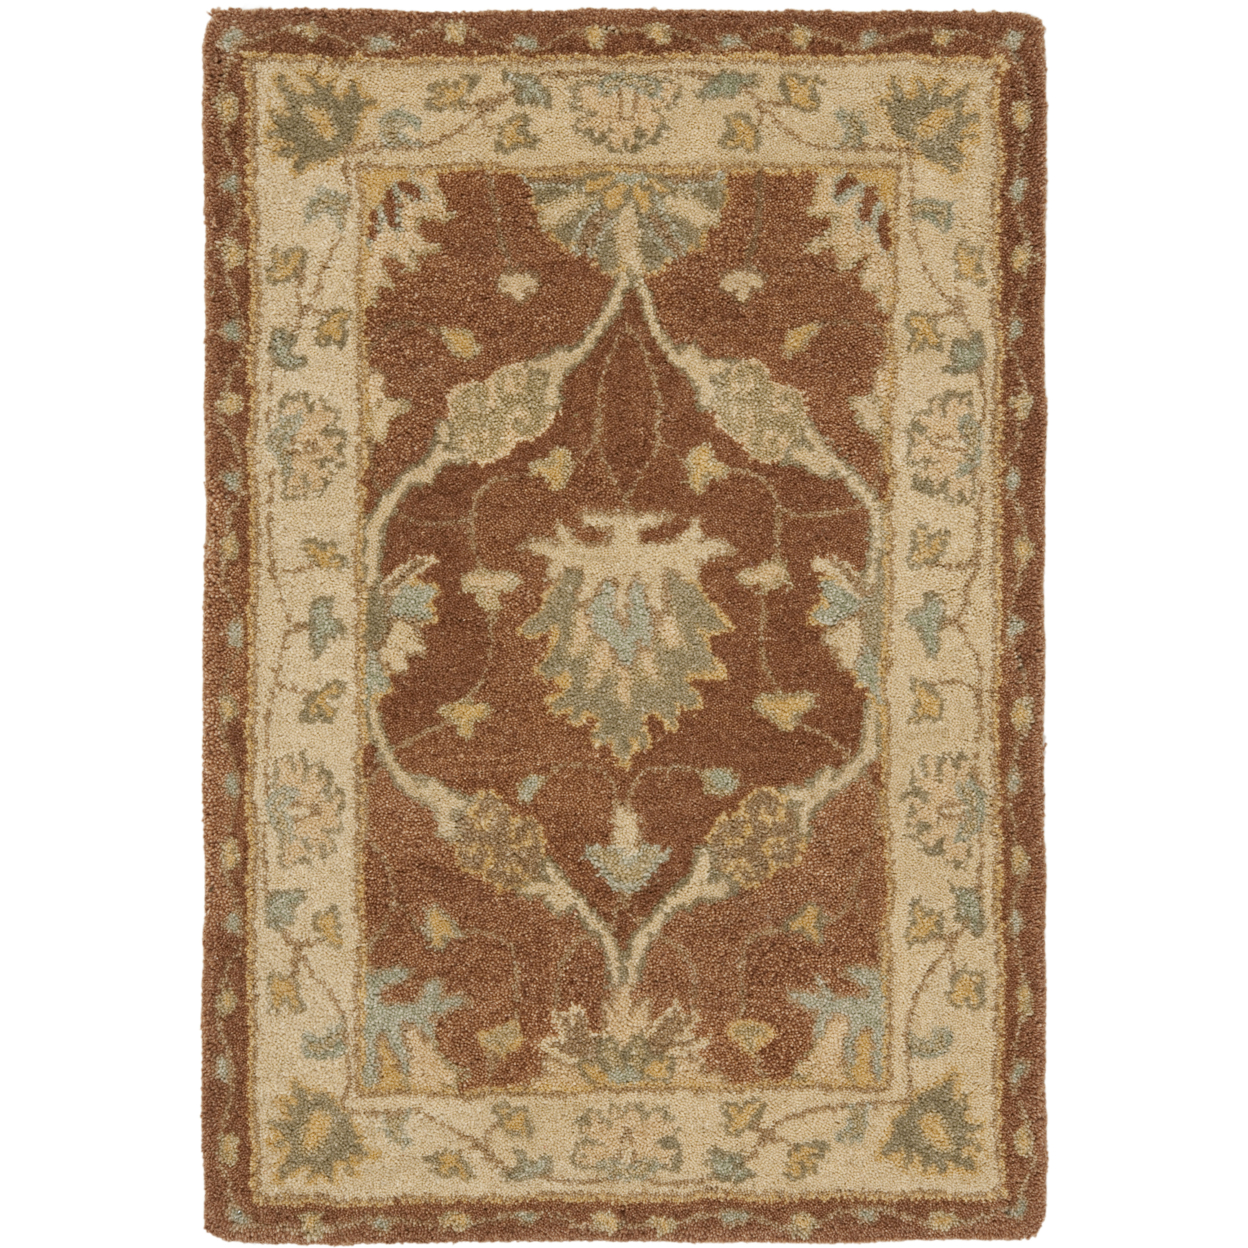 SAFAVIEH Antiquity AT315A Handmade Brown / Taupe Rug - 5' X 8'